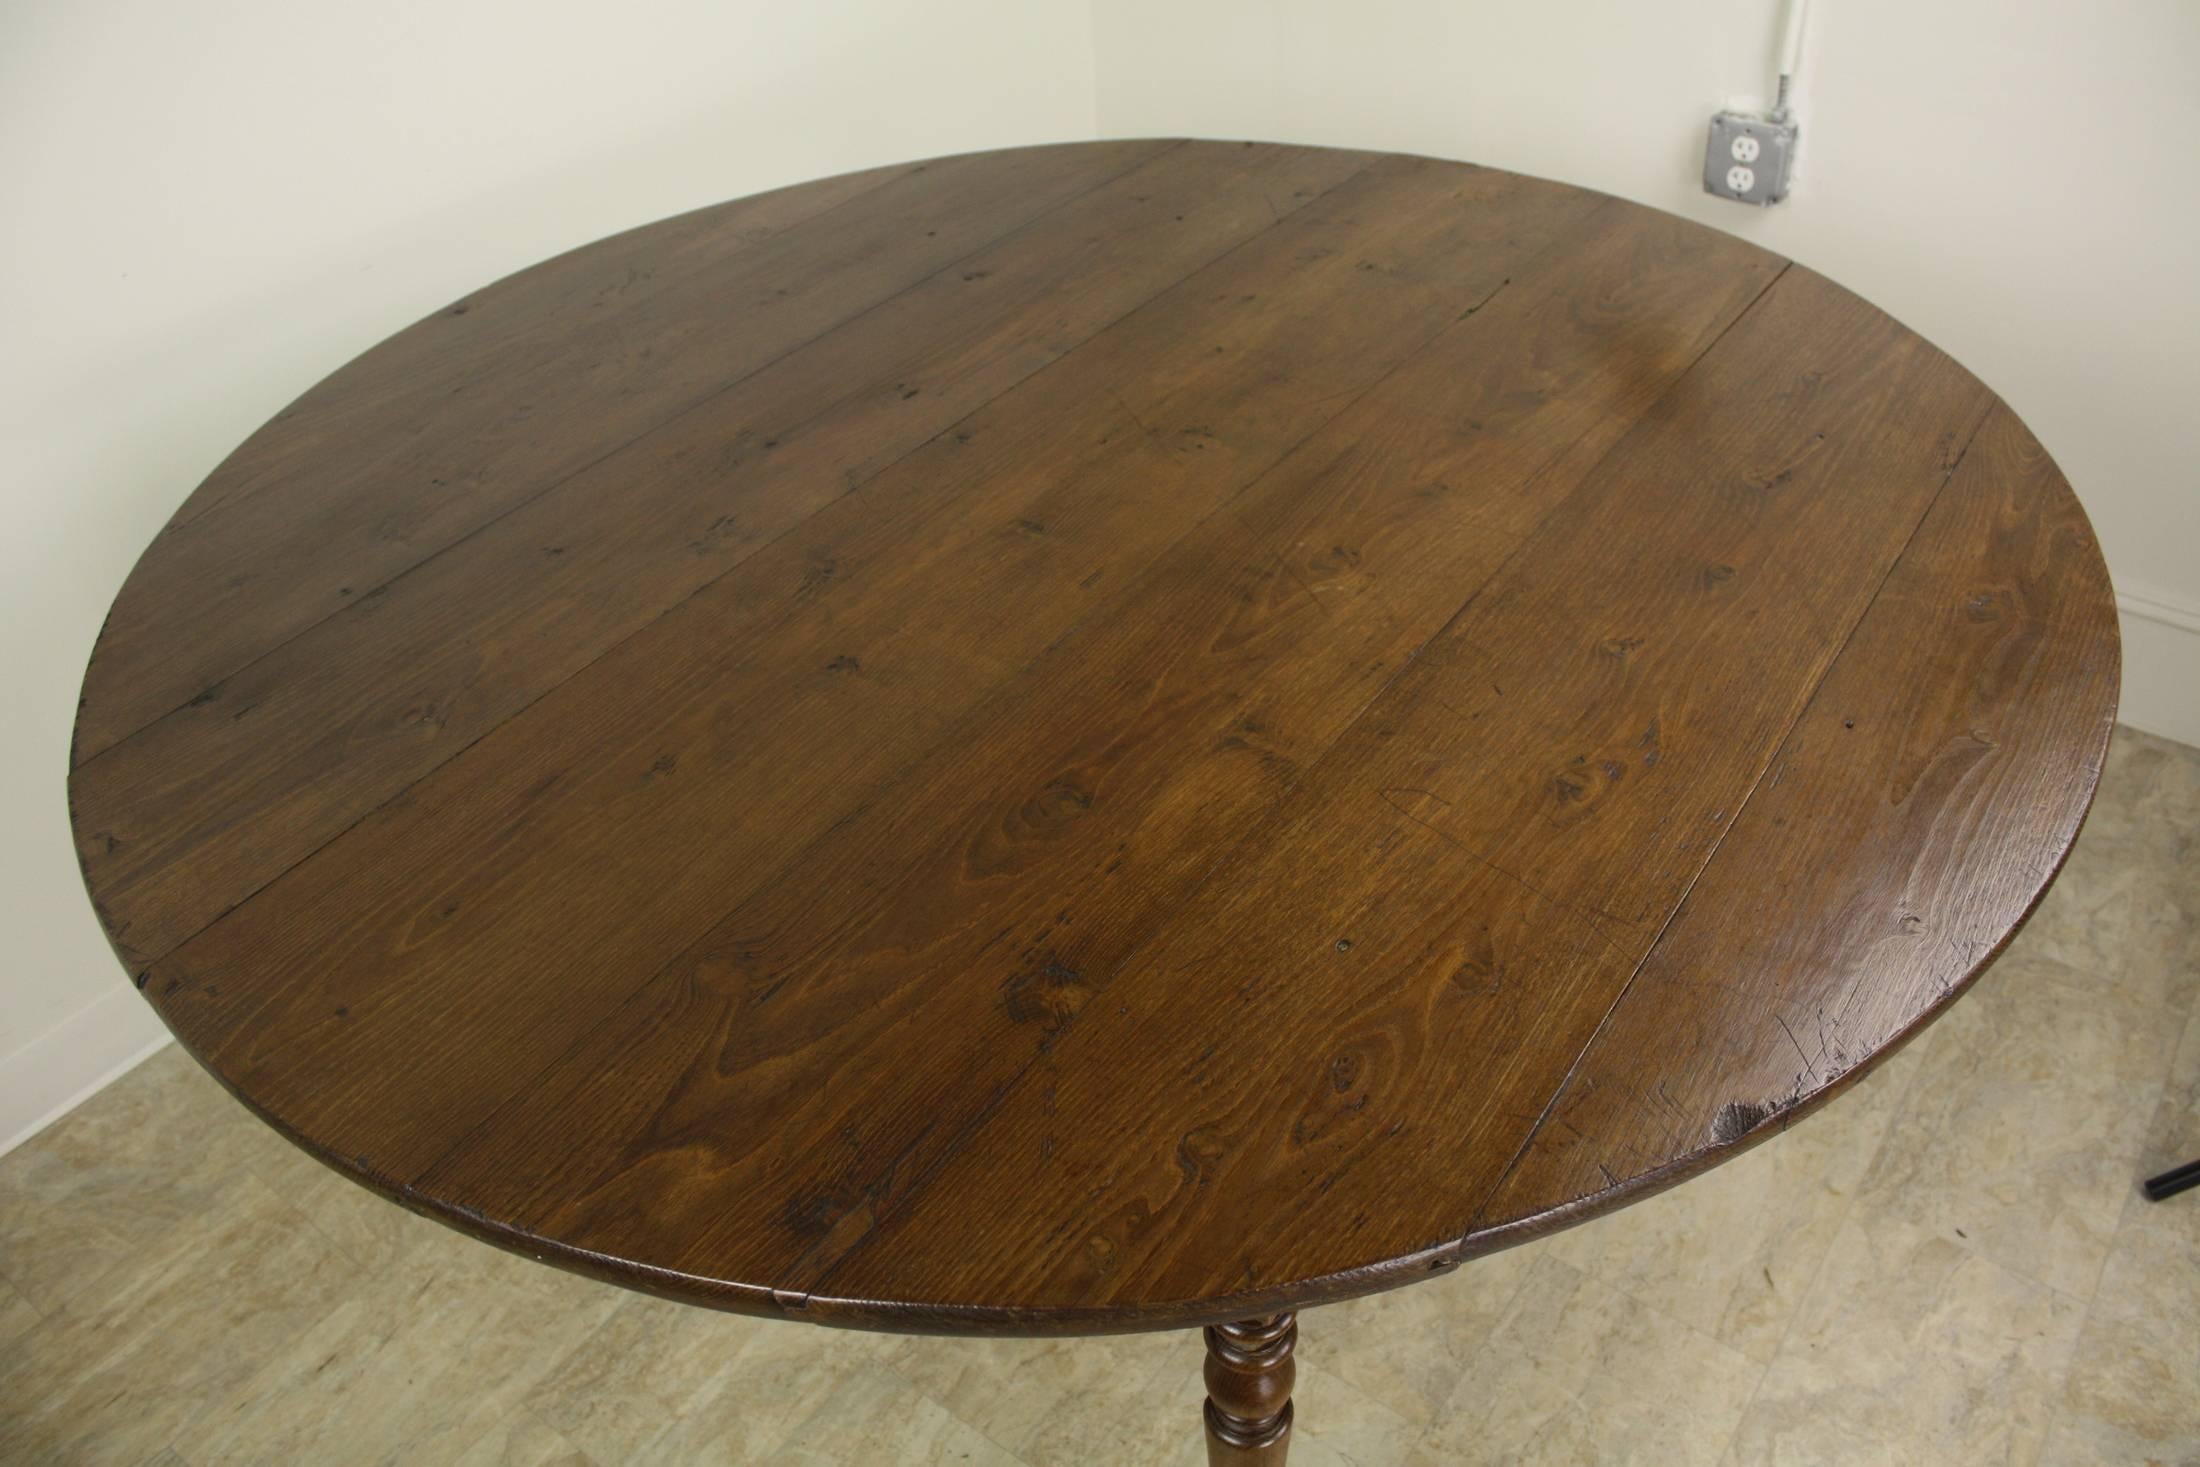 An almost perfect round dining table in laburnum wood, with elegant turned legs and brass castors. The top has rich color and lovely patina. The base is inset enough, 11